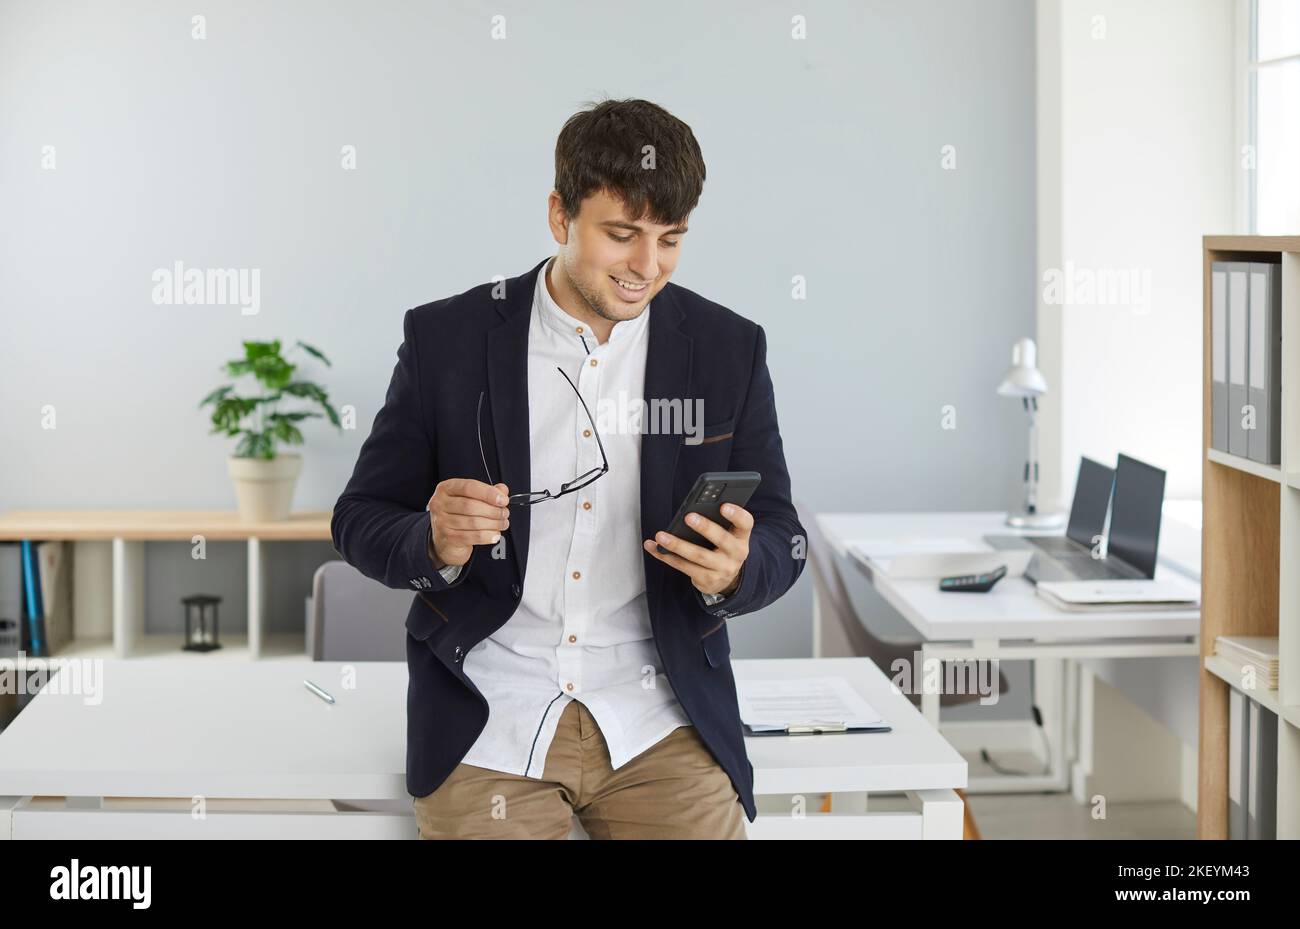 Young businessman standing in office and using online banking app on mobile phone Stock Photo